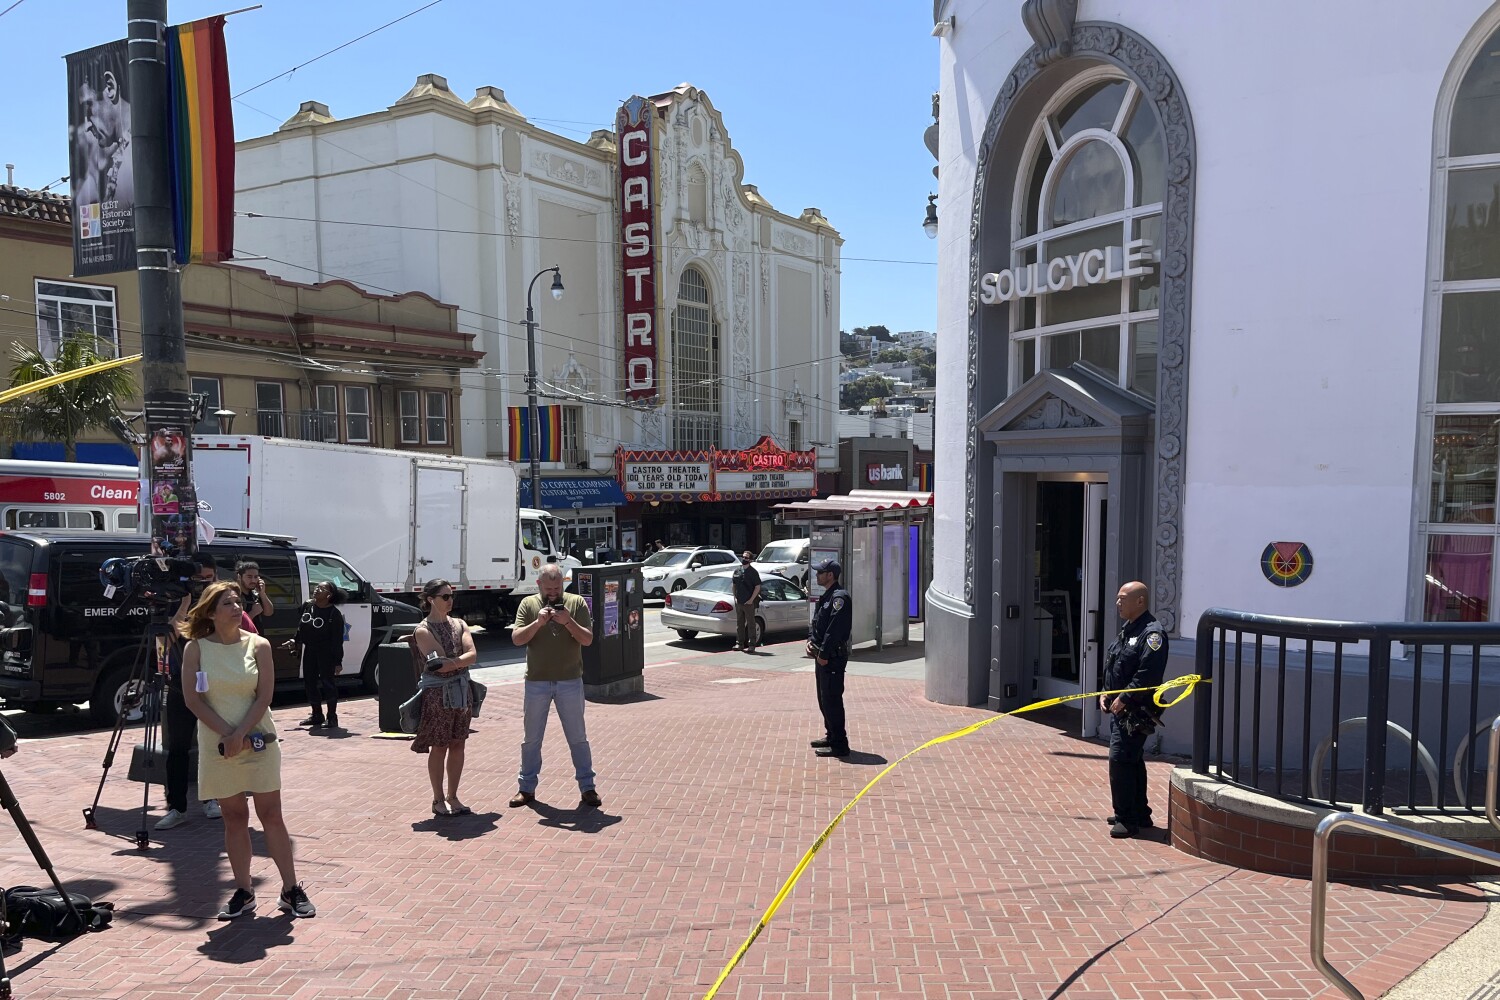 1 dead, 1 injured in shooting on San Francisco Muni train near the Castro; shooter at large